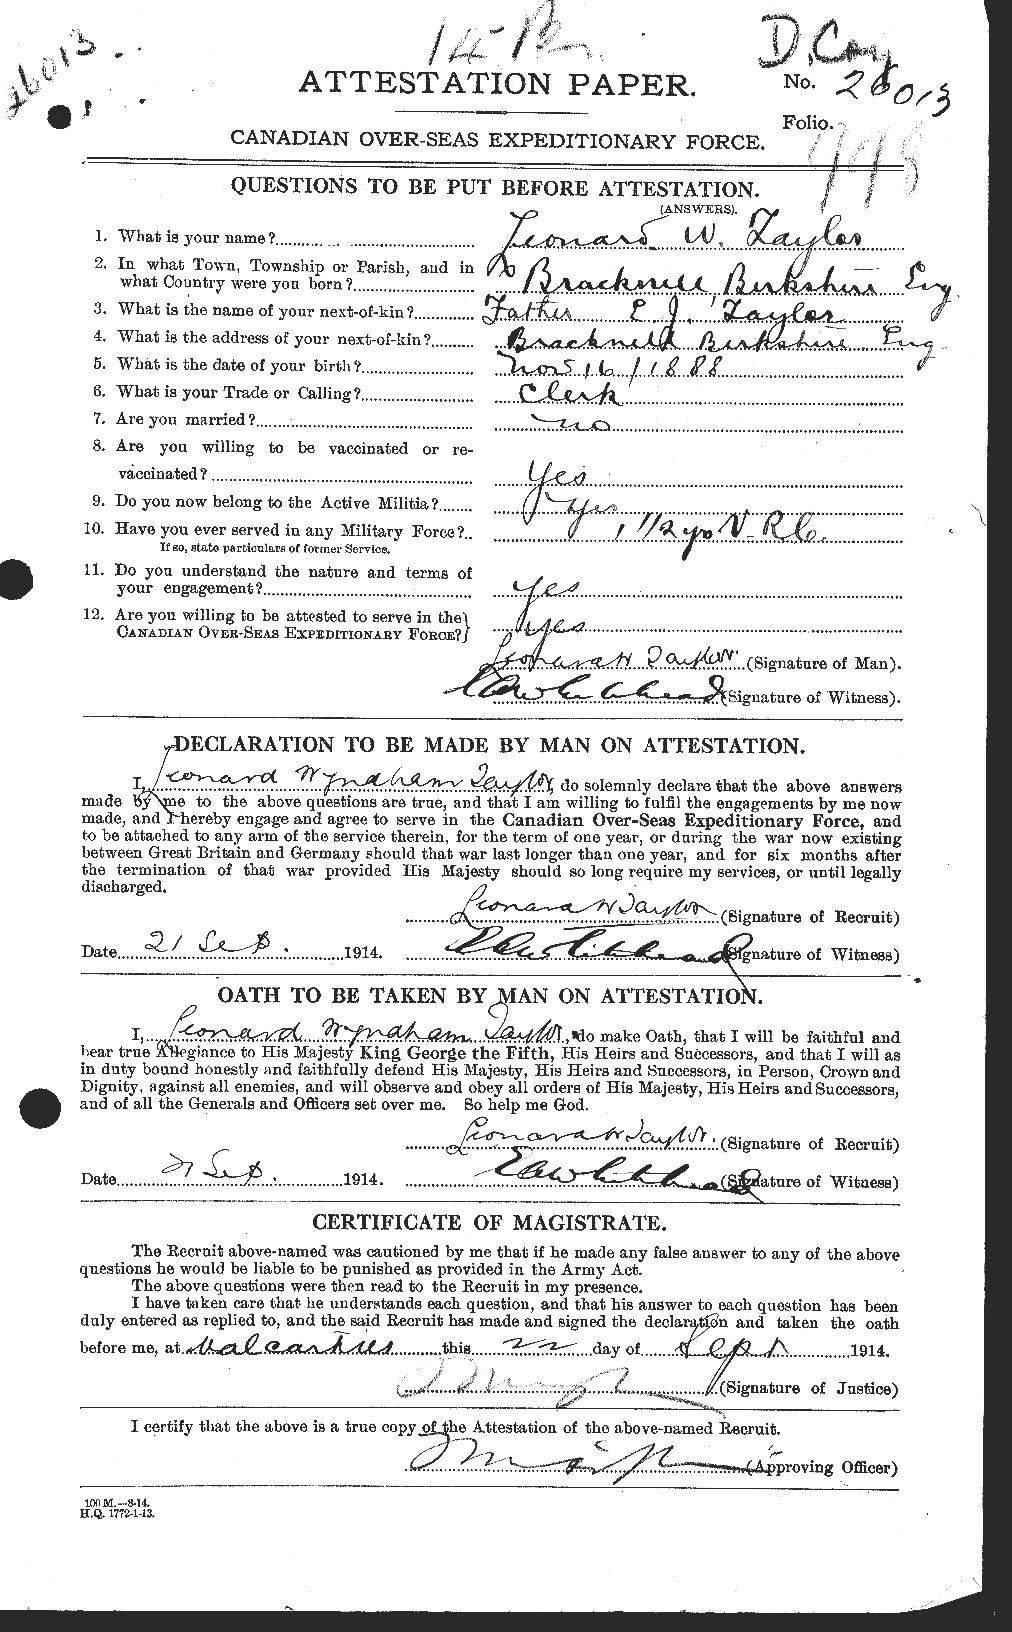 Personnel Records of the First World War - CEF 627632a